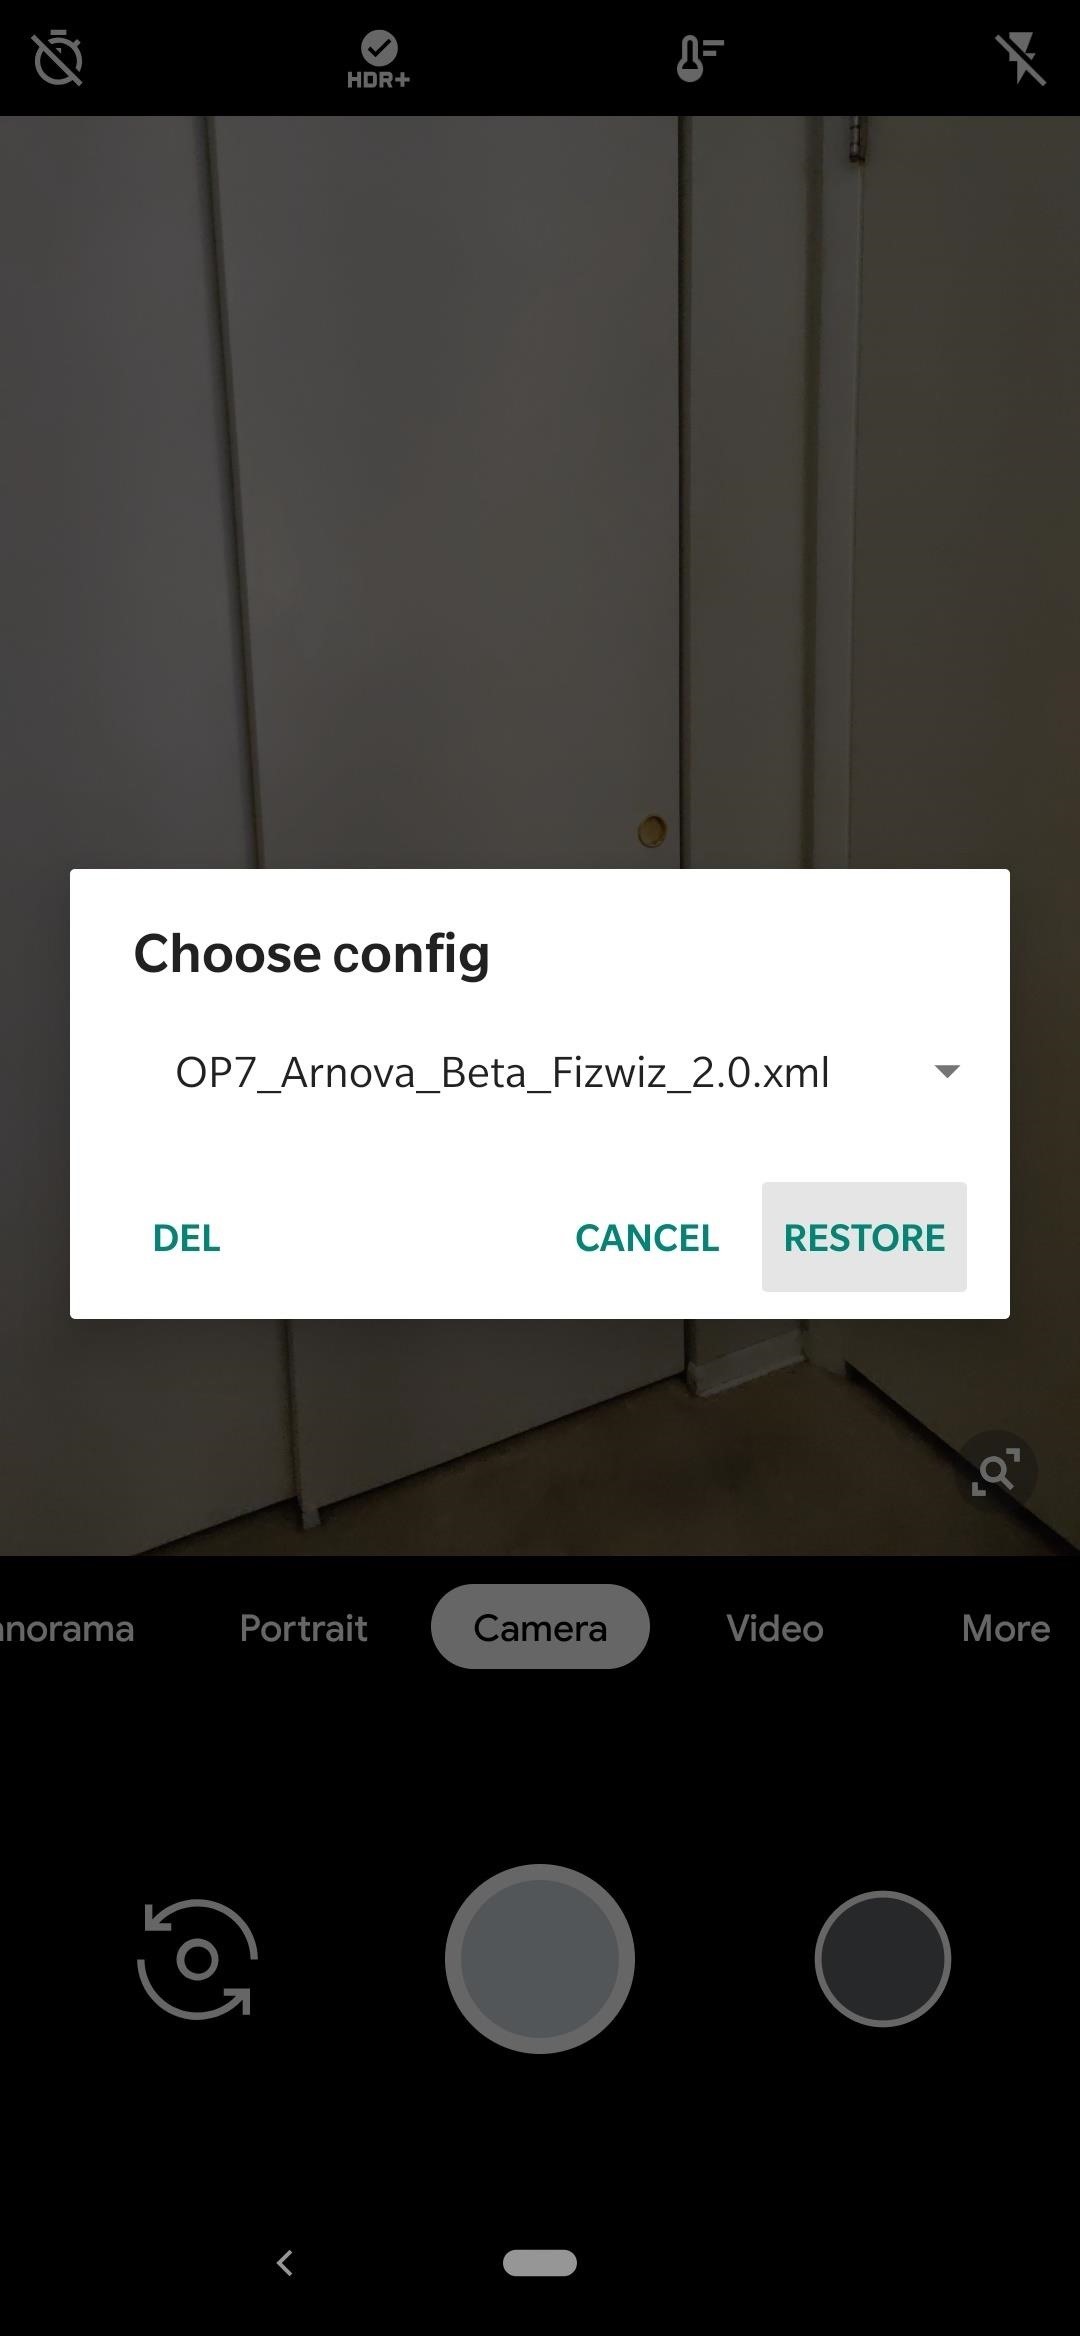 How to Install Google Camera on Your OnePlus 7 Pro for Better Photo Quality & Night Sight